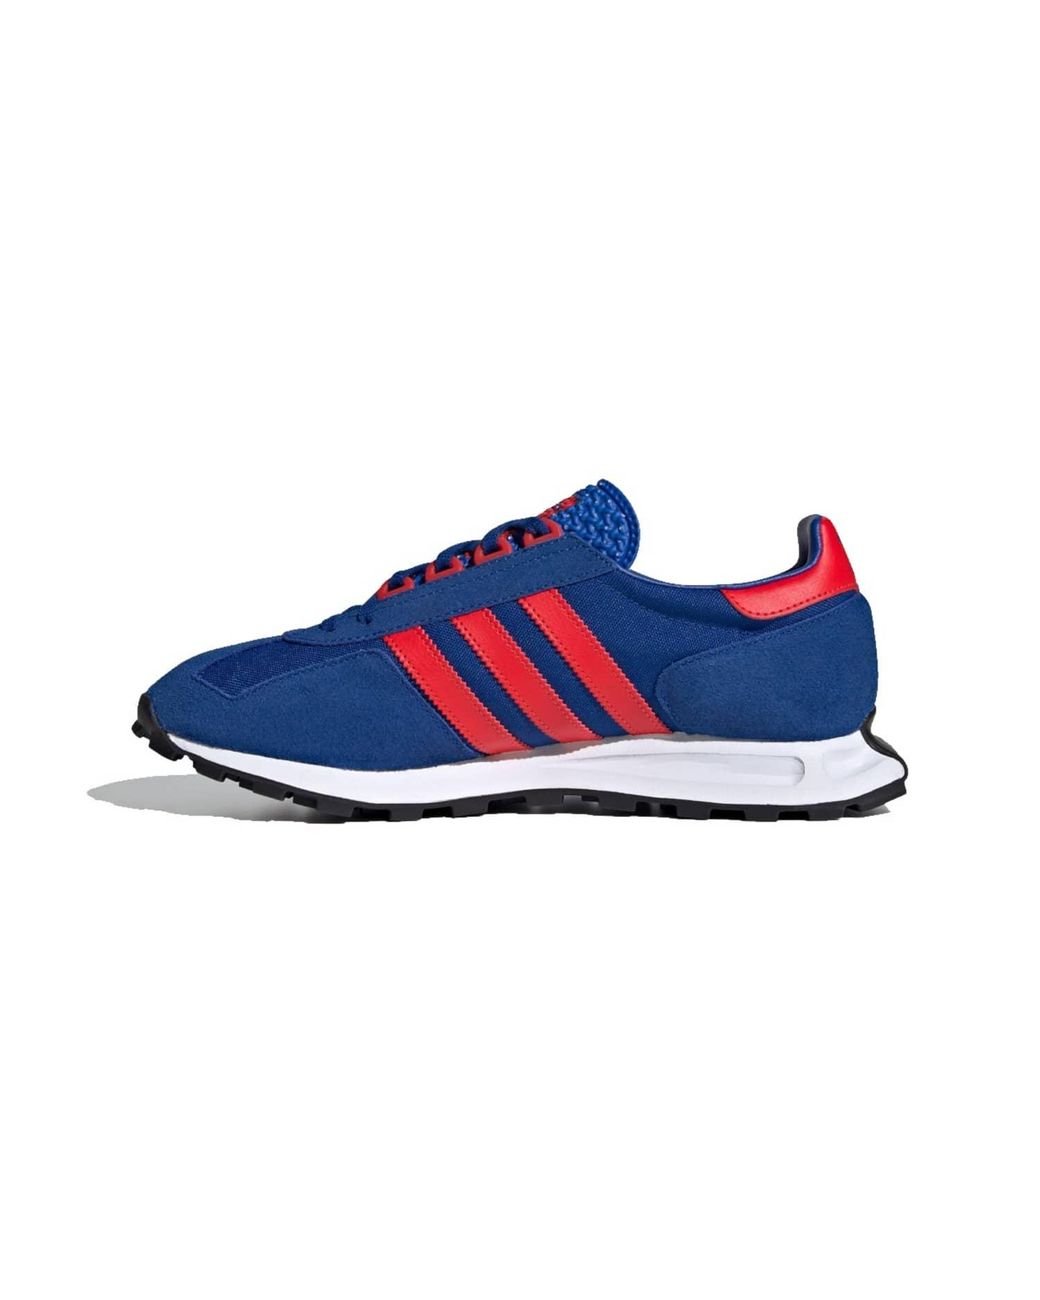 adidas Racing 1 Shoes Royal Blue & Red for Men | Lyst